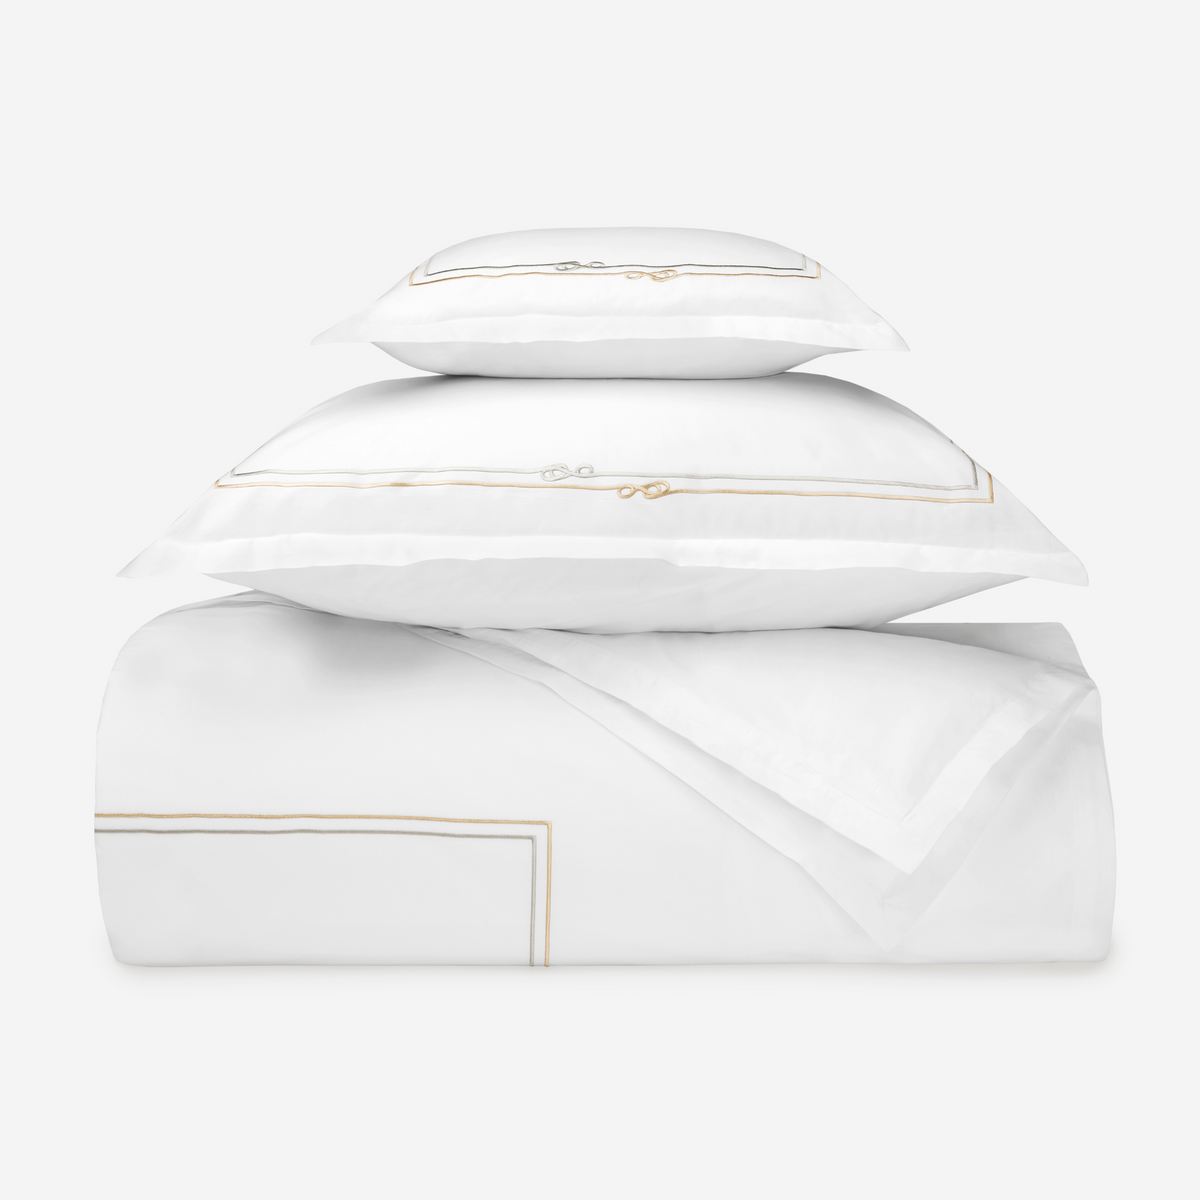 Sferra Squillo Bedding Shams and Duvet in White/Platinum Color Stacked